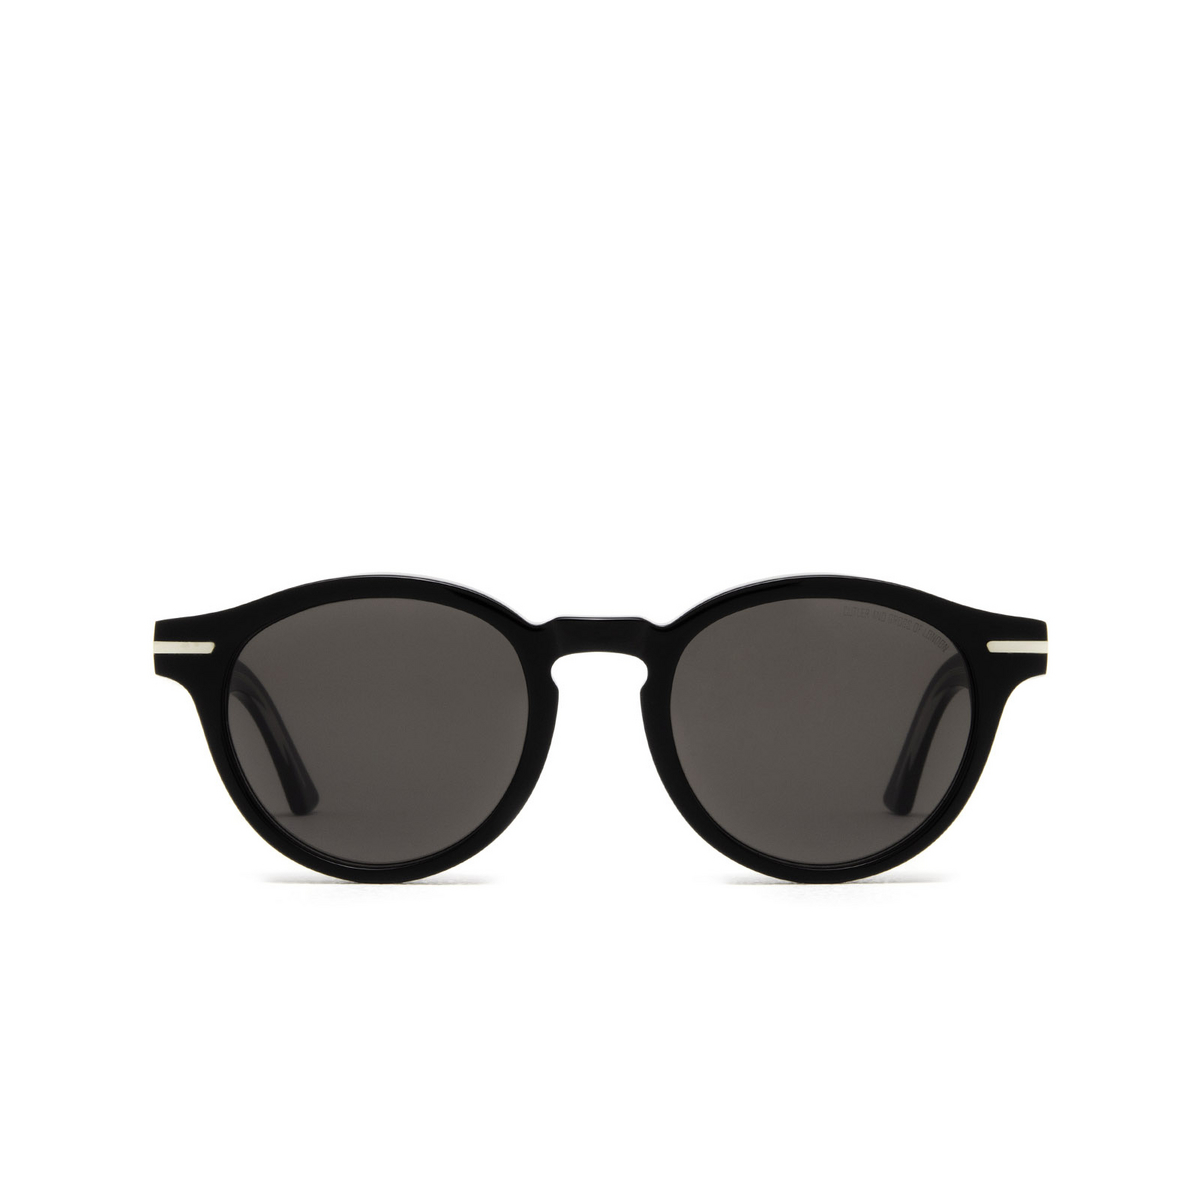 Cutler and Gross 1338 Sunglasses 01 Black - front view